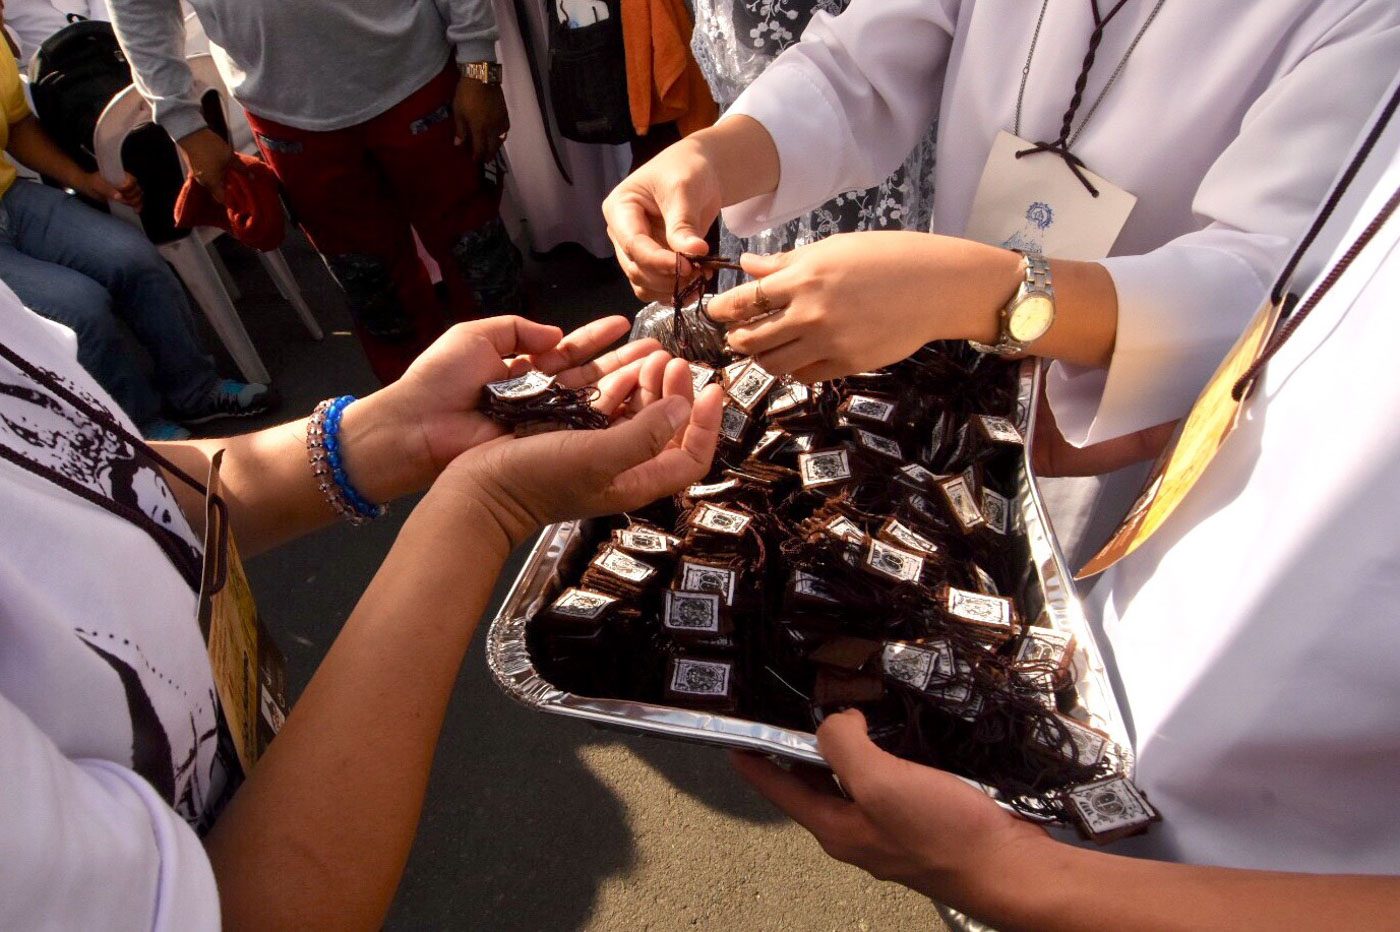 SCAPULARS DISTRIBUTED. Volunteers distribute scapulars during the Mass at the Quirino Grandstand on May 4, 2018, for the 400th anniversary of the arrival of Our Lady of Mount Carmel in the Philippines. Photo by Angie de Silva/Rappler 